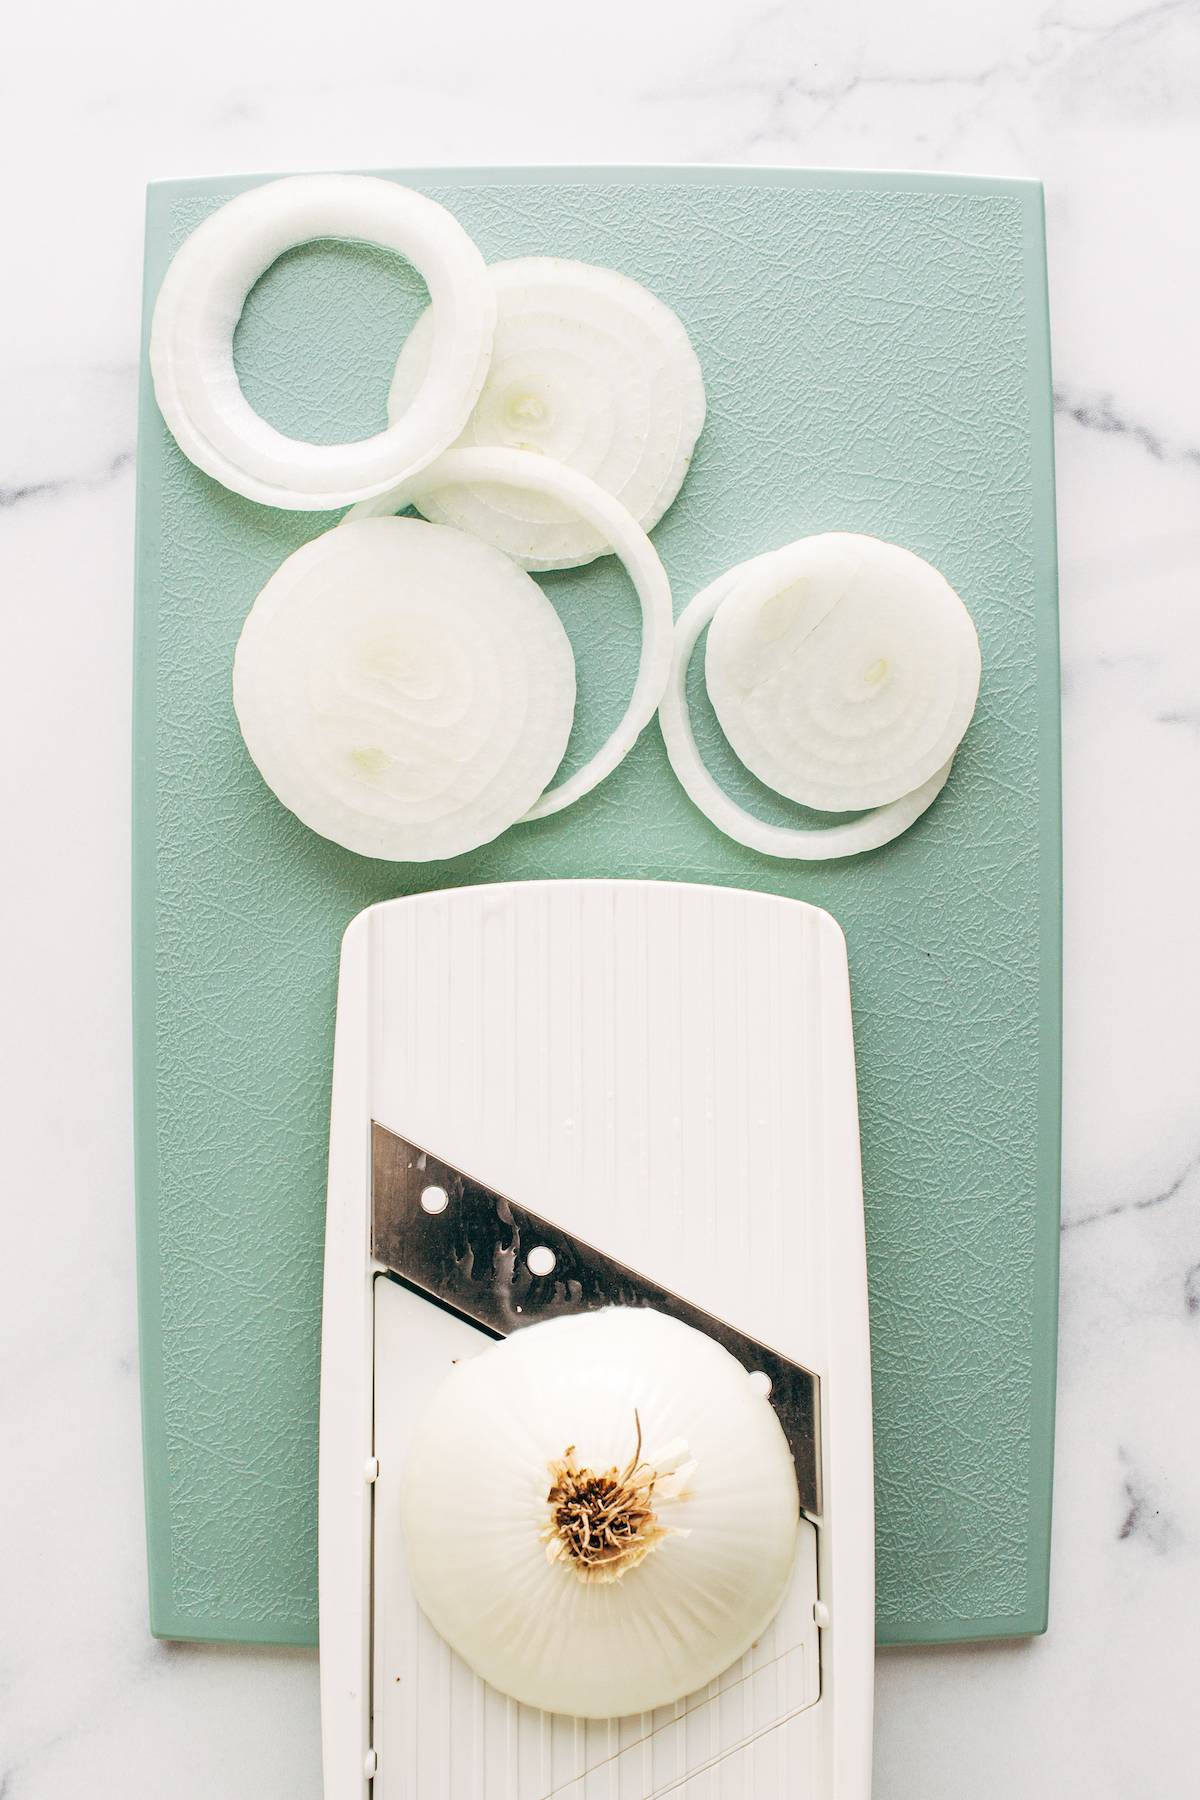 Rings of onions on a cutting board with a mandoline.